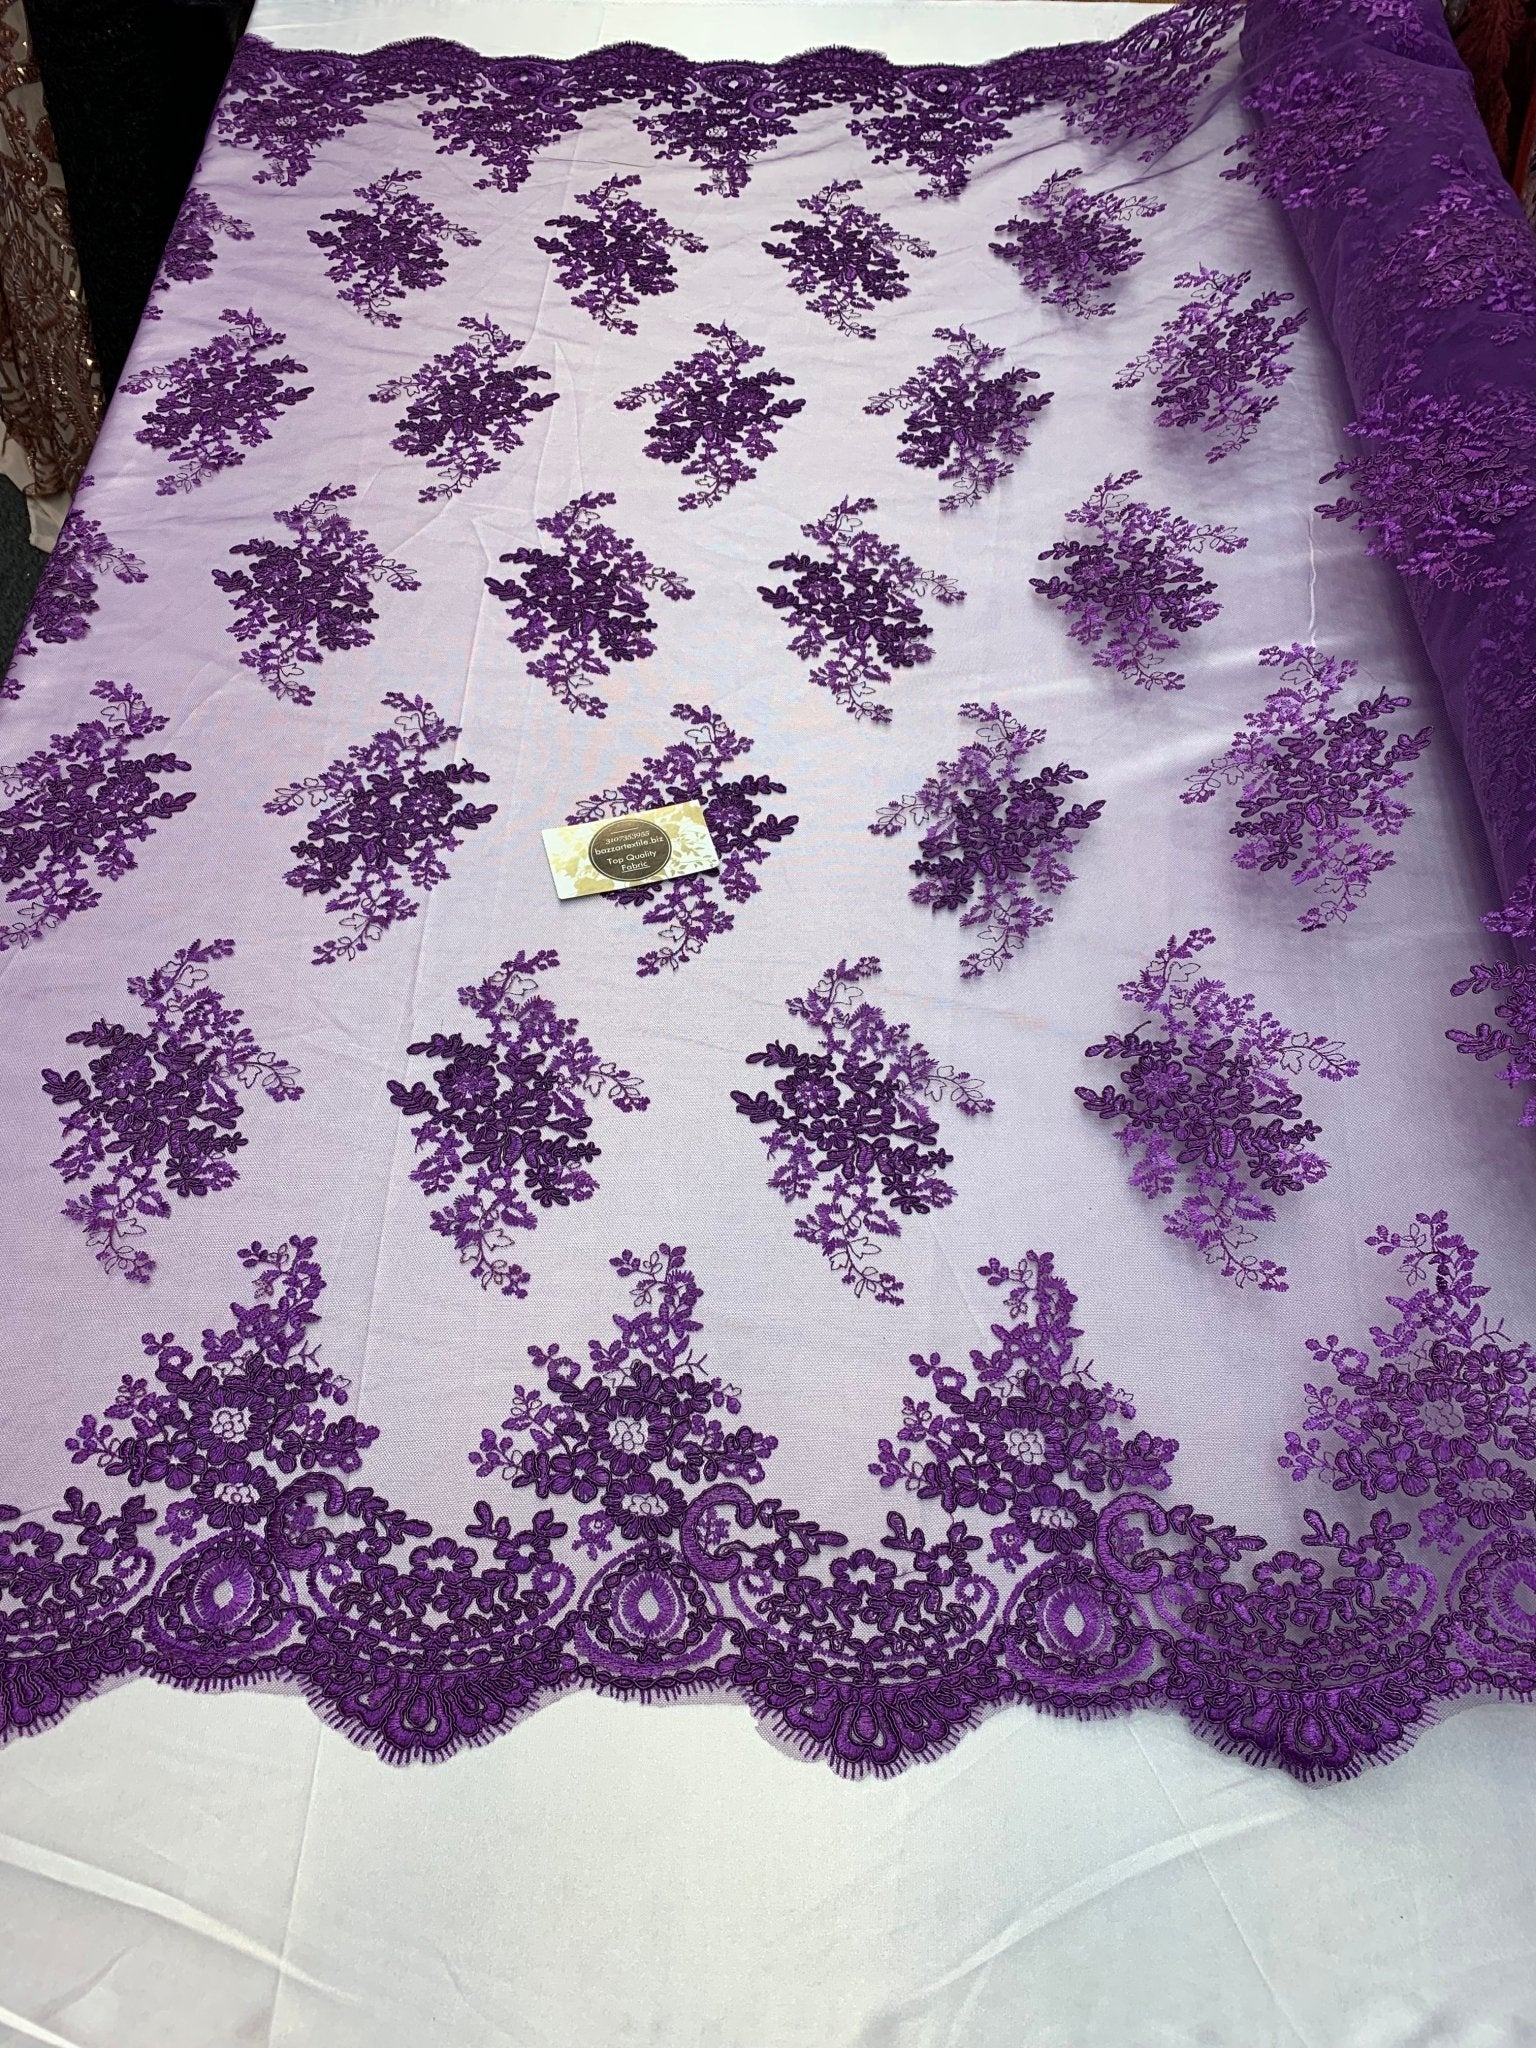 French Design Flower/Floral Mesh Lace (By The Yard) Embroidery Lace Fabric (Purple) For Tablecloths/ Runners/ Skirts/ CostumesICE FABRICSICE FABRICSFrench Design Flower/Floral Mesh Lace (By The Yard) Embroidery Lace Fabric (Purple) For Tablecloths/ Runners/ Skirts/ Costumes ICE FABRICS